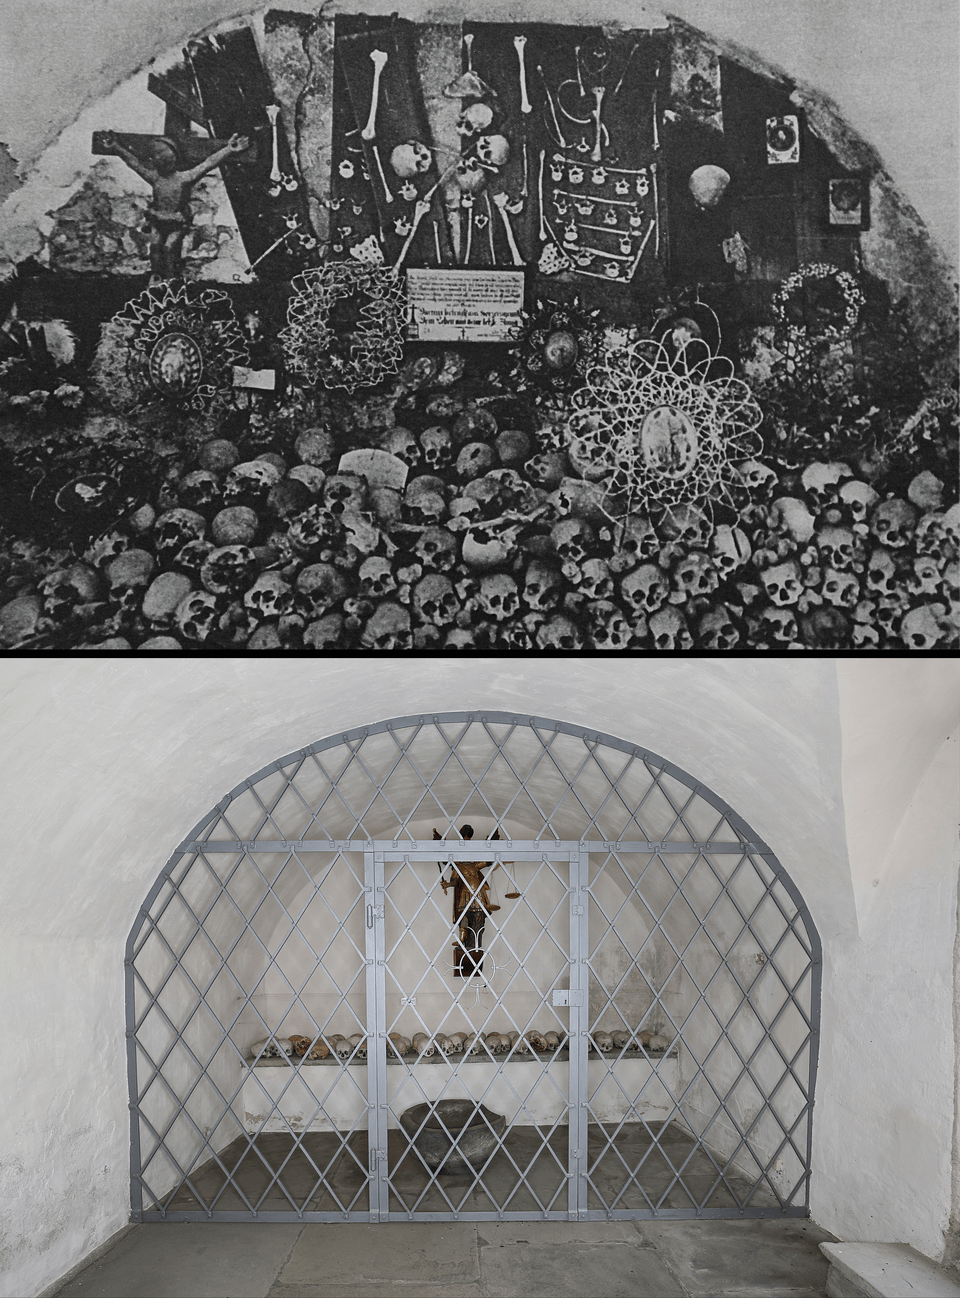 The ossuary of Domat/Ems then and now